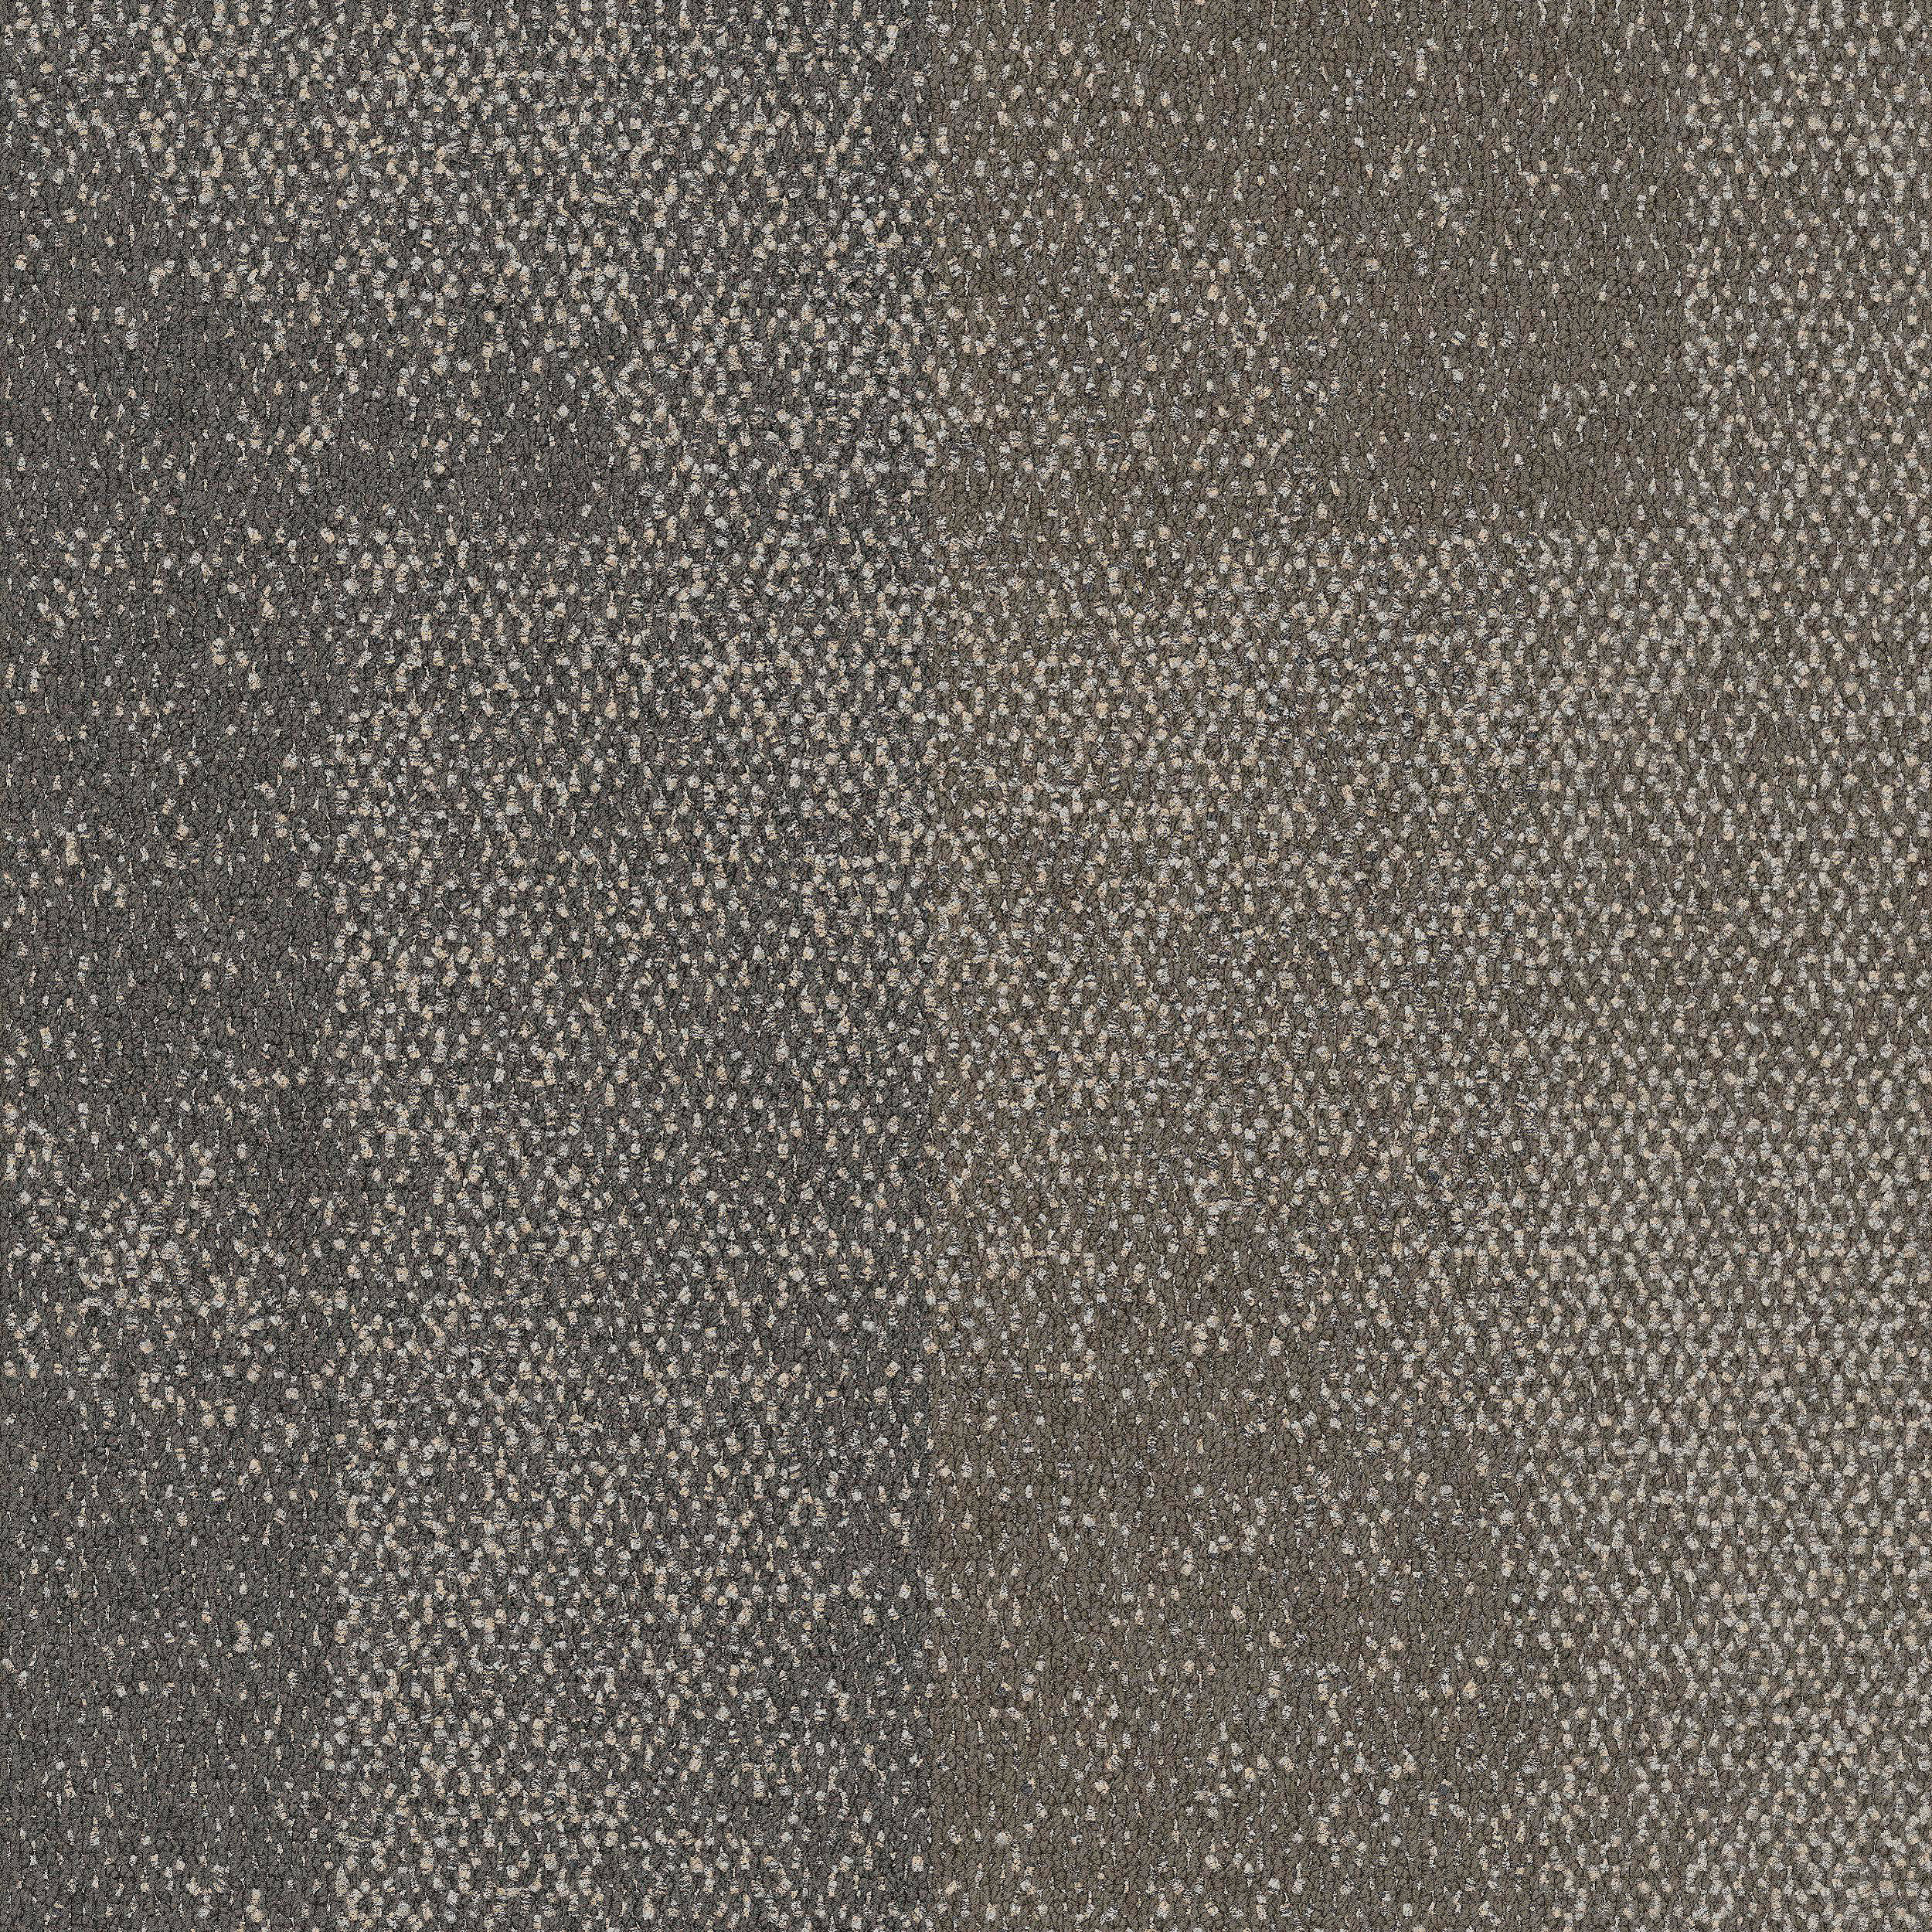 Exposed Carpet Tile In Iron Works numéro d’image 11